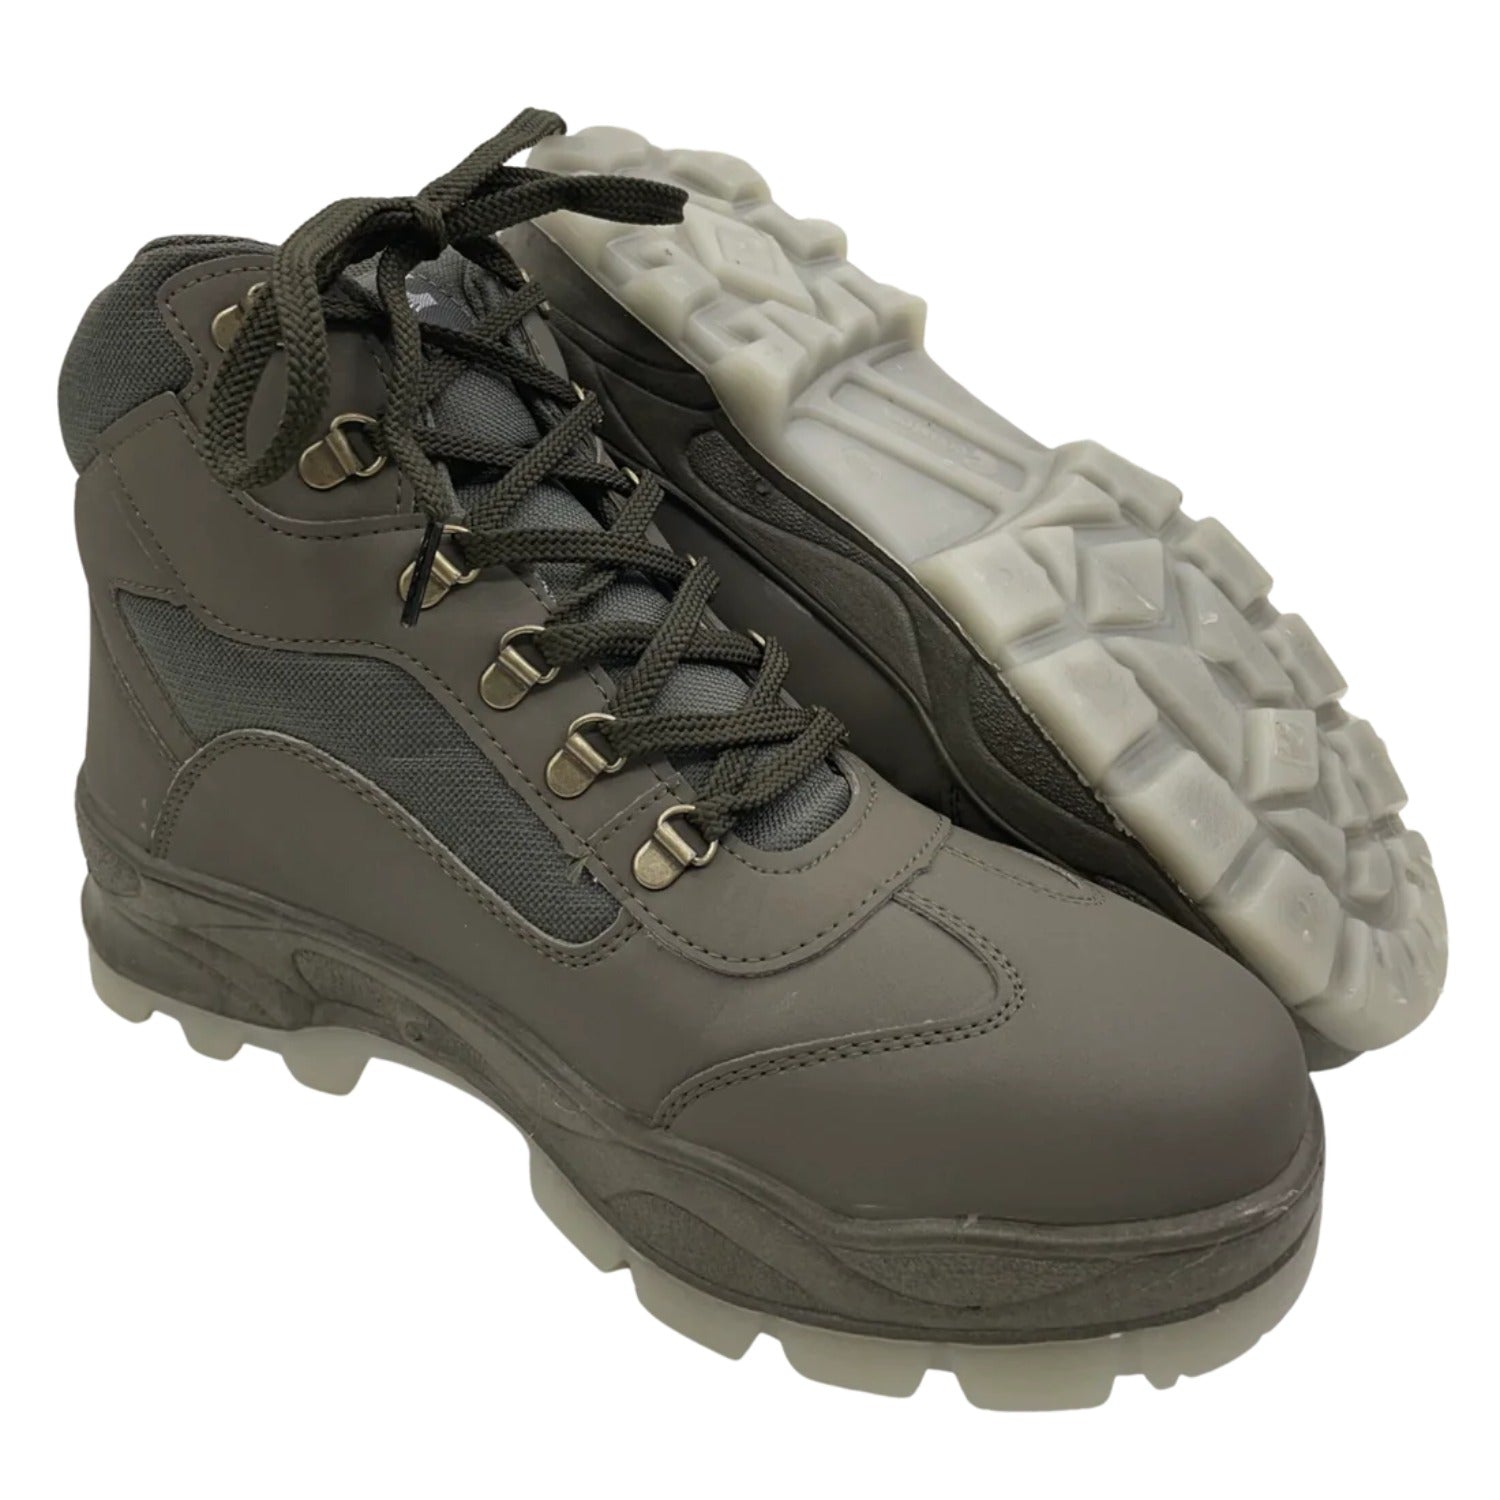 Buy Gokyo Trekking Shoes - Mid Ankle Olive | Trekking & Hiking Shoes at Gokyo Outdoor Clothing & Gear